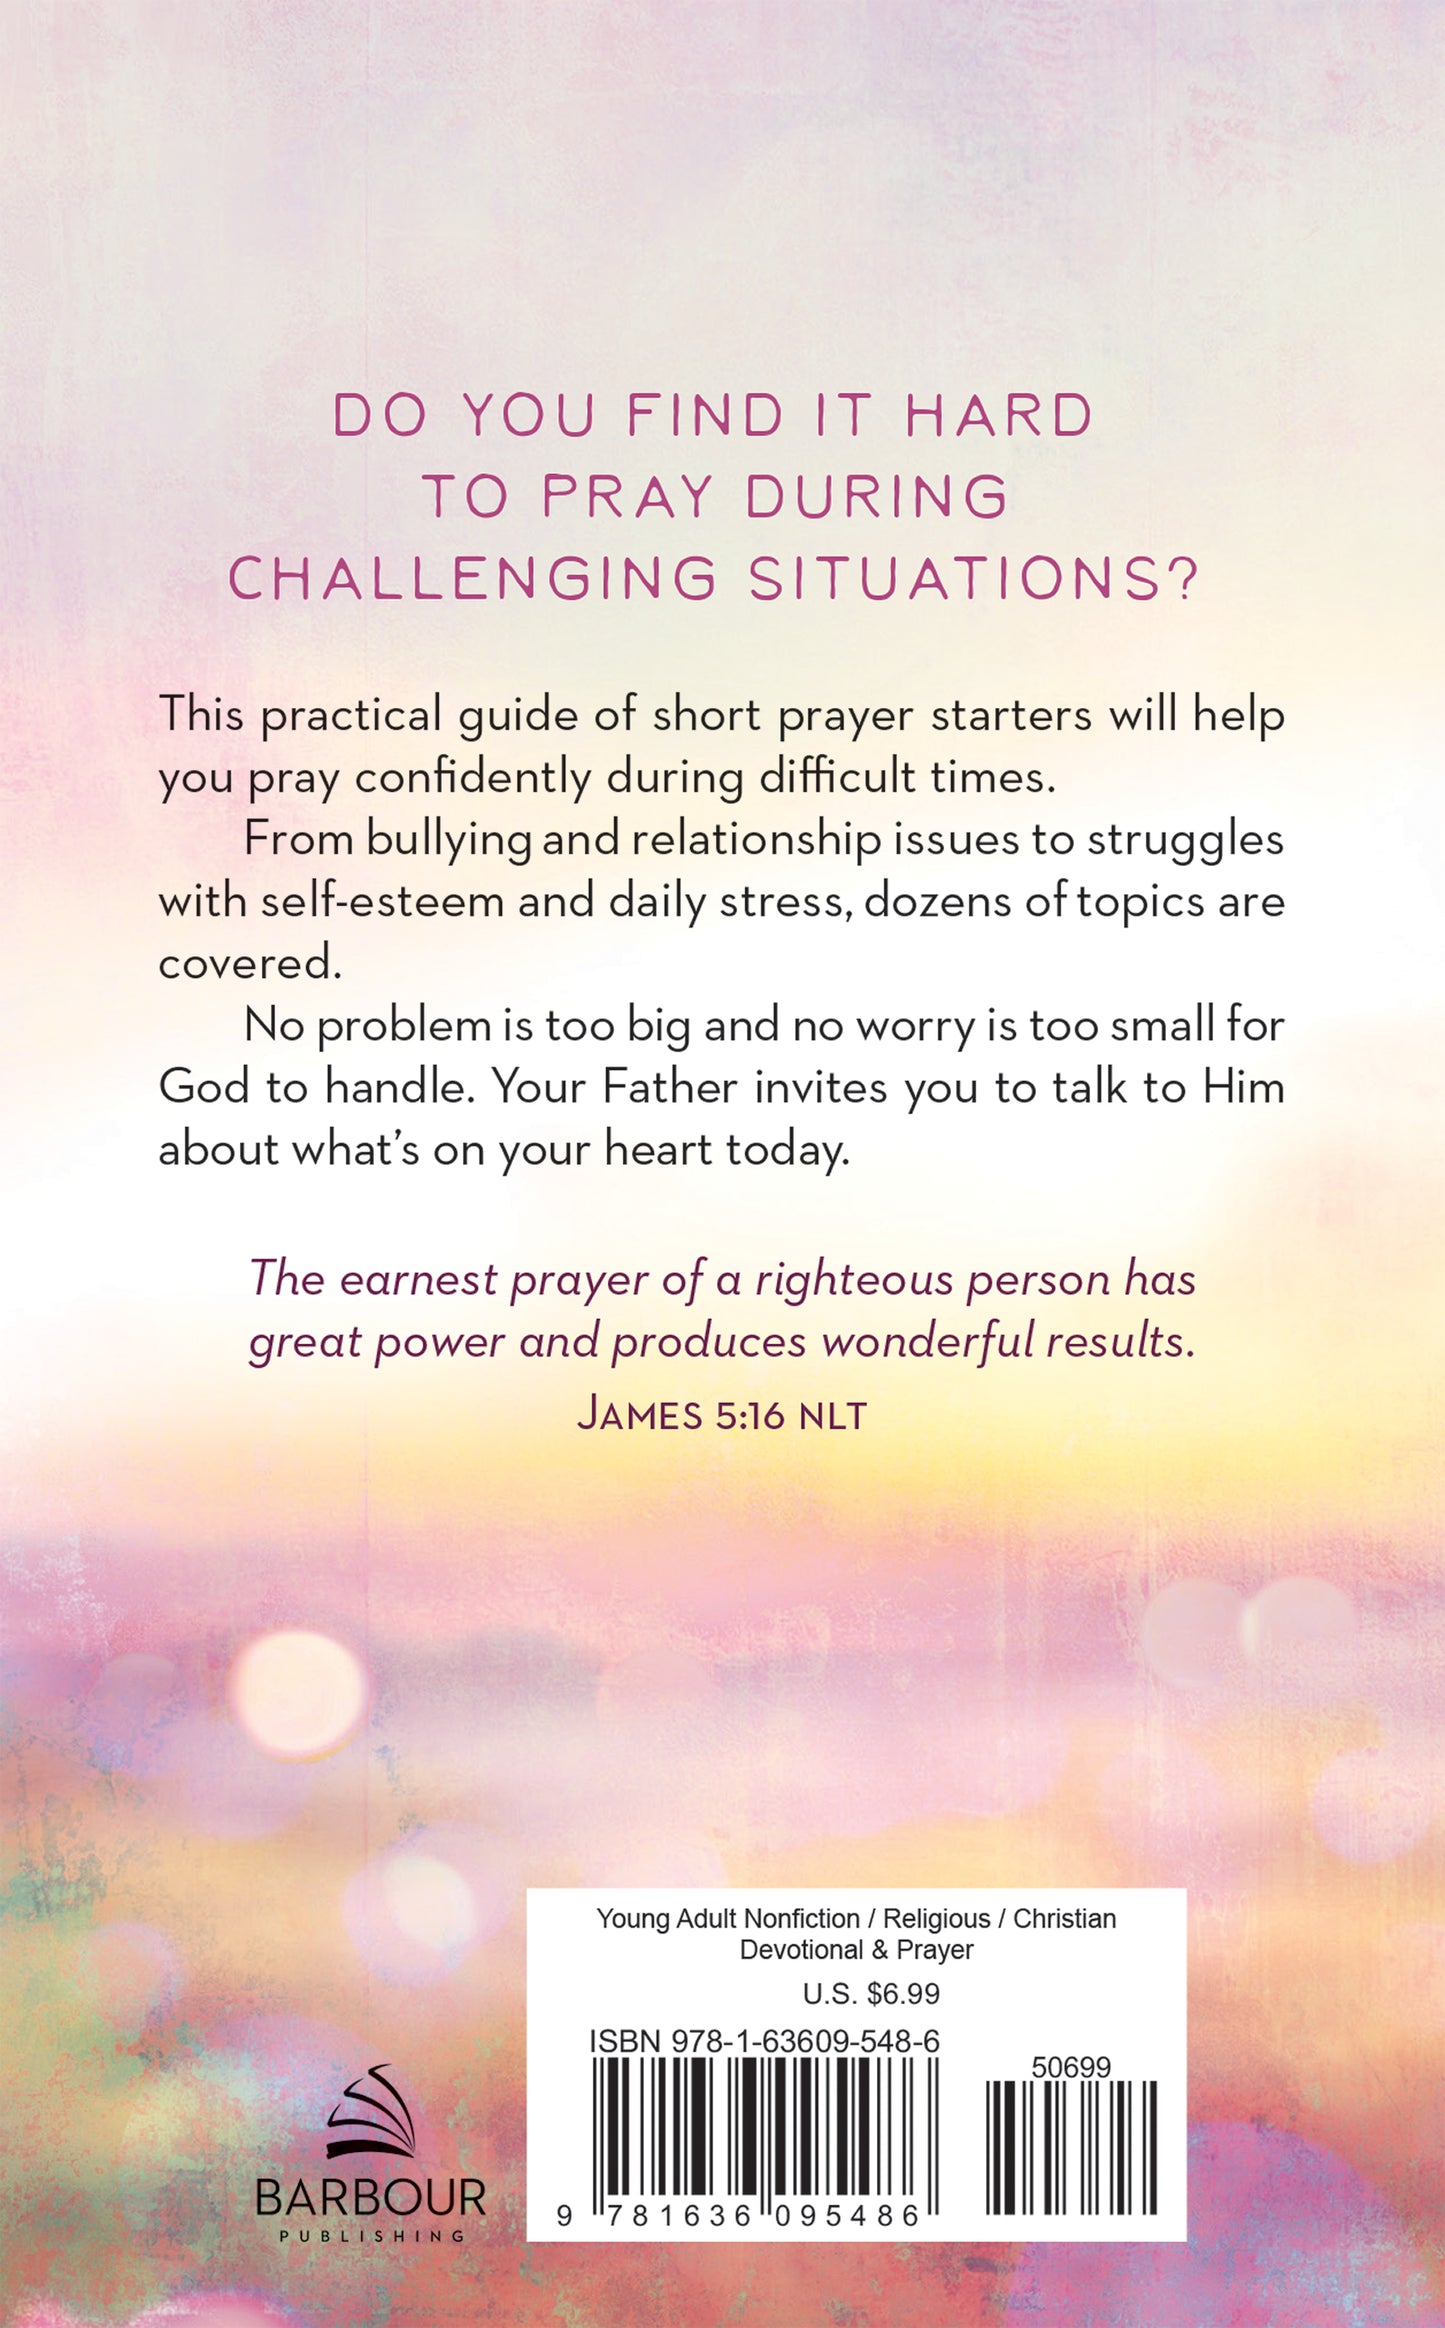 Prayers for Difficult Times for Teen Girls - The Christian Gift Company